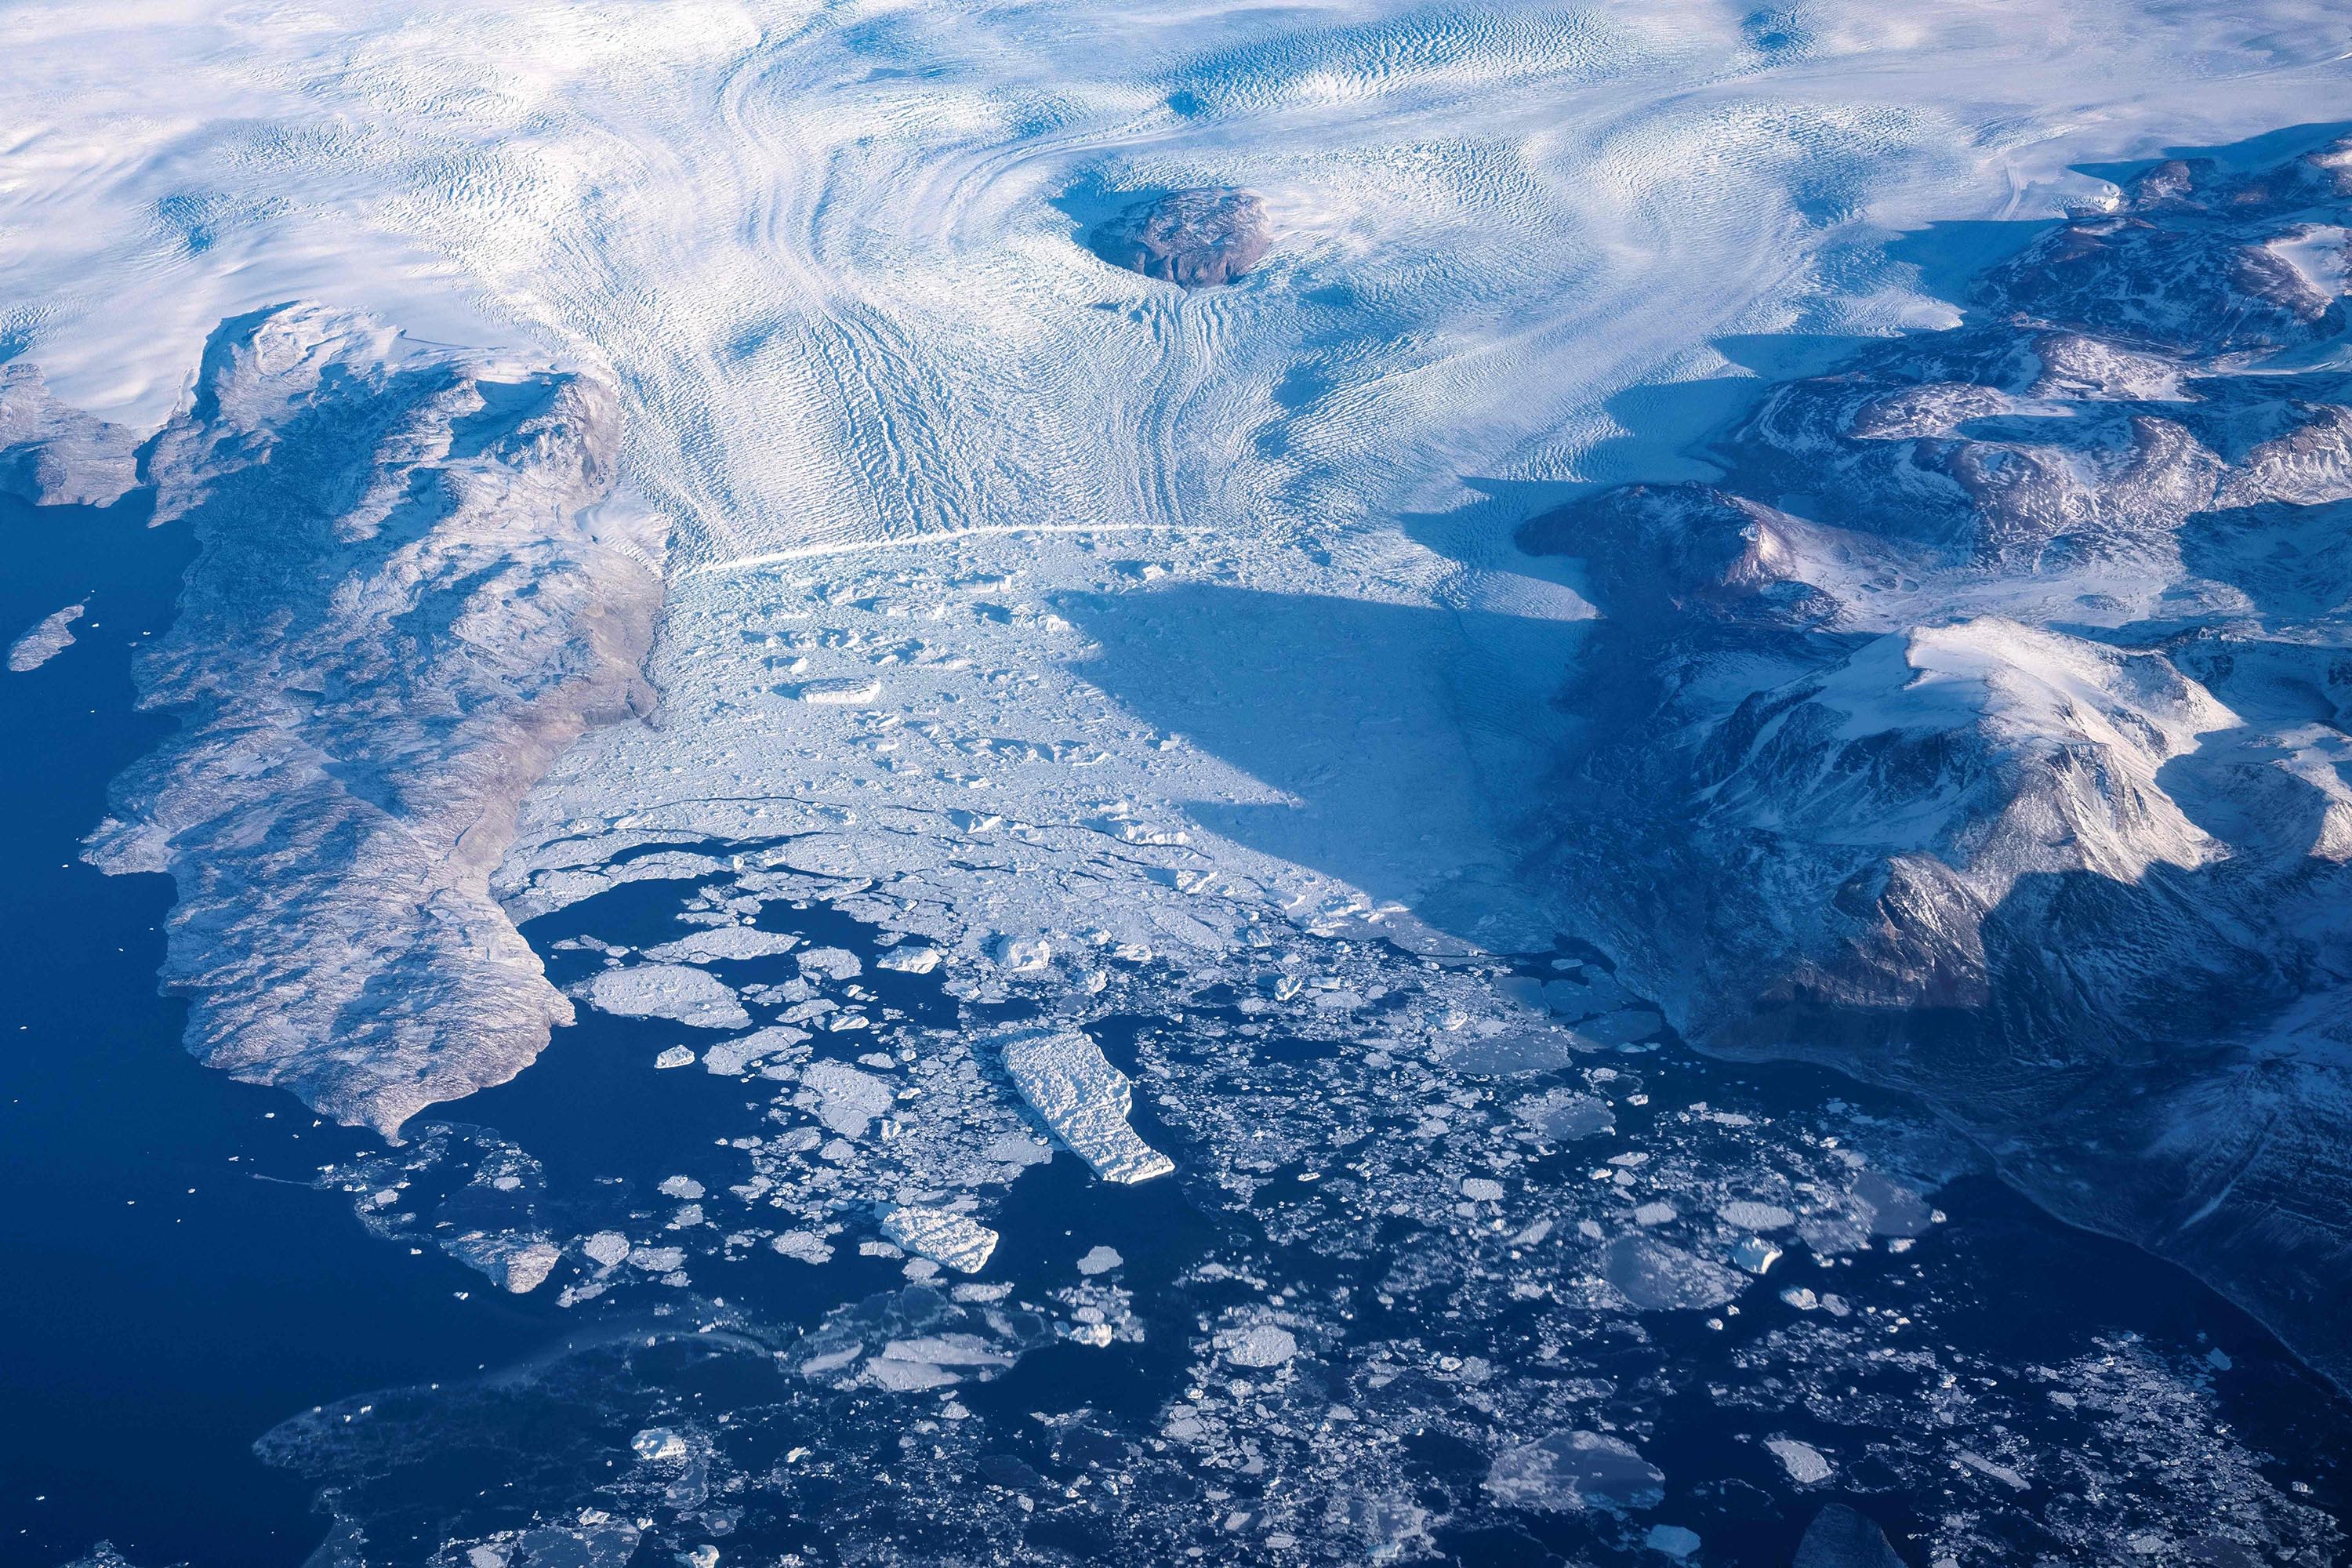 Greenland's northern glaciers are in trouble, threatening